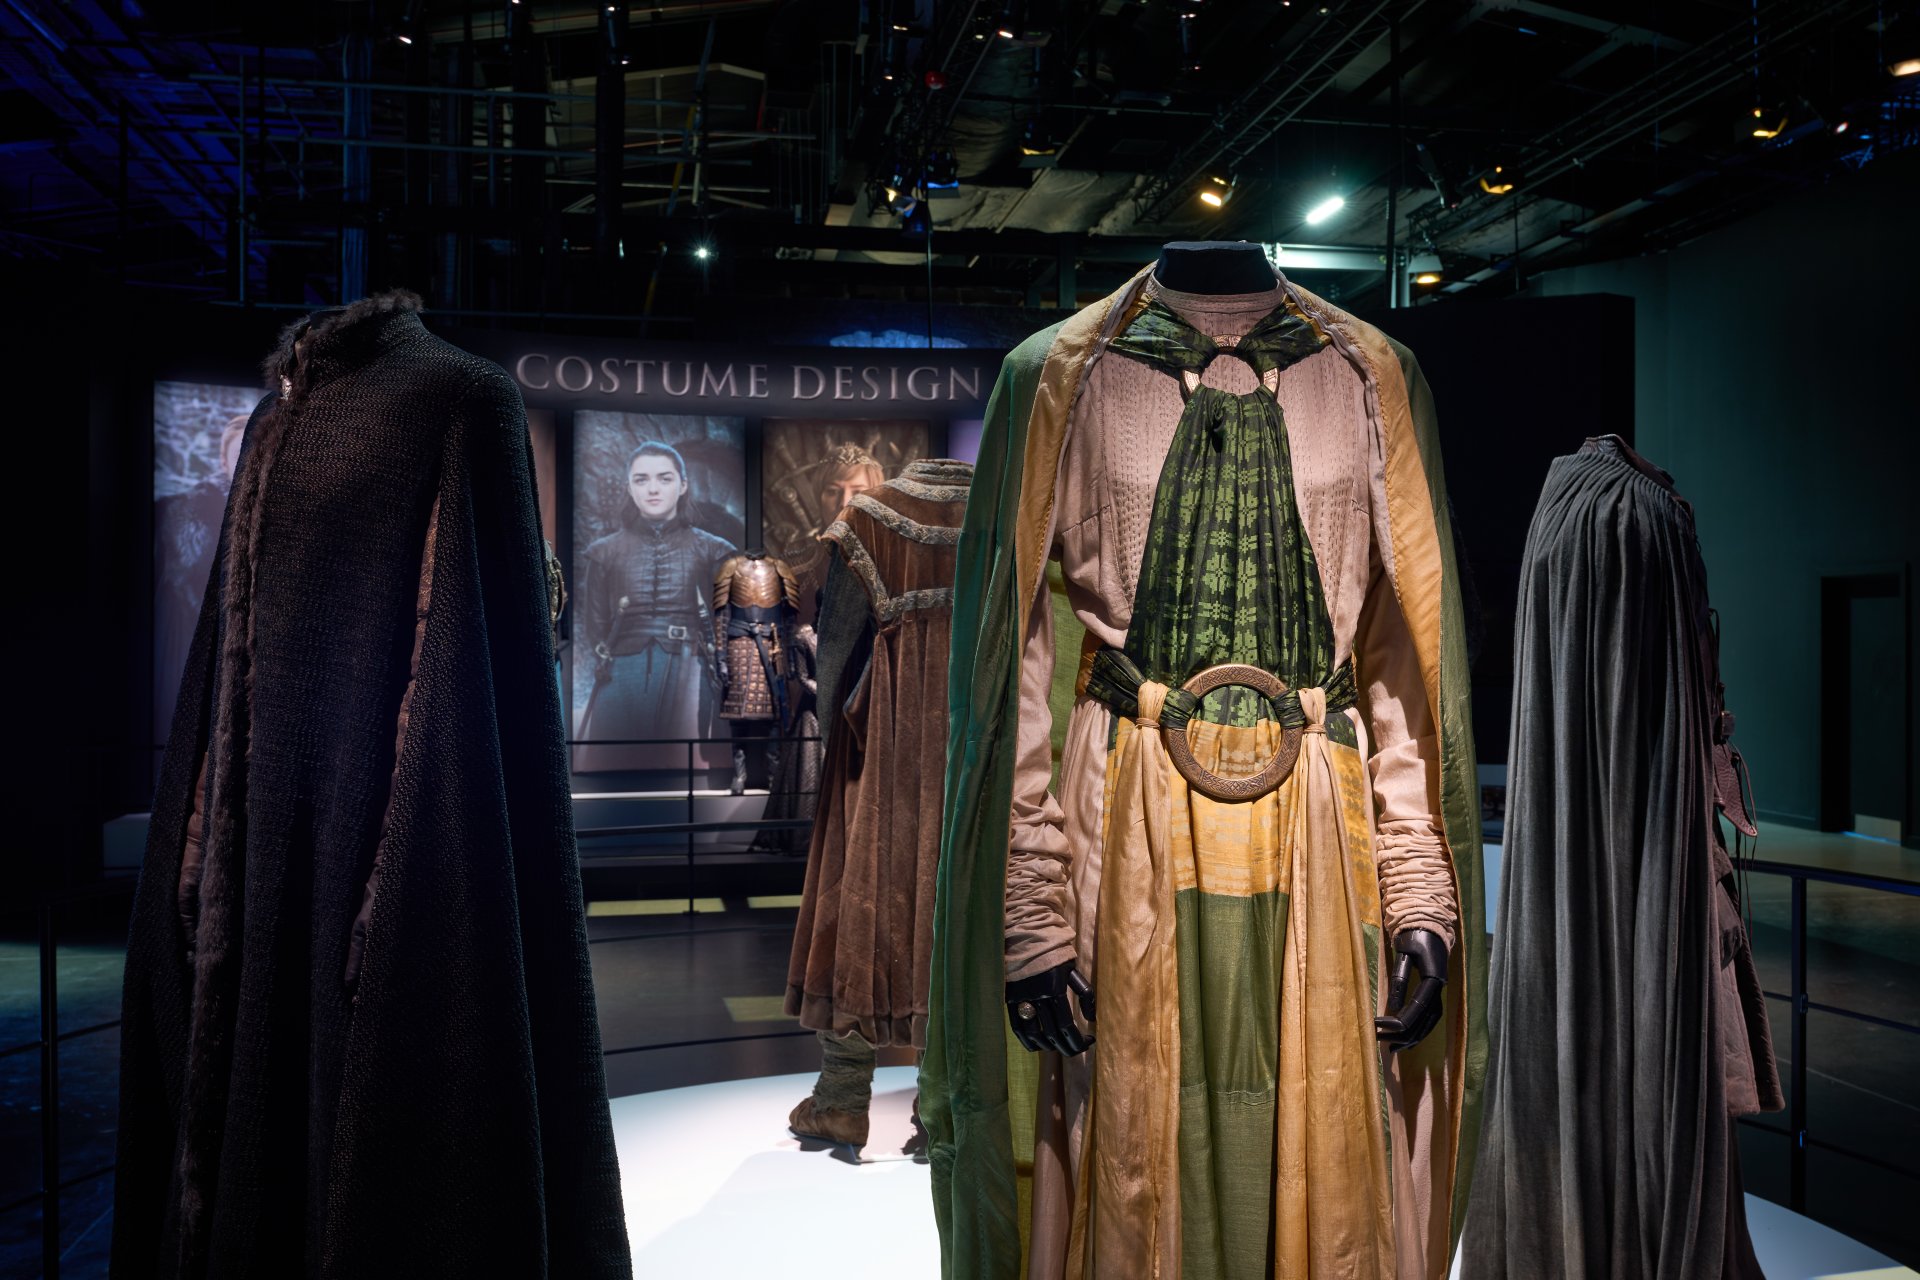 New, New Sneak Peek Images Released From Inside The Hugely Anticipated Game of Thrones Studio Tour